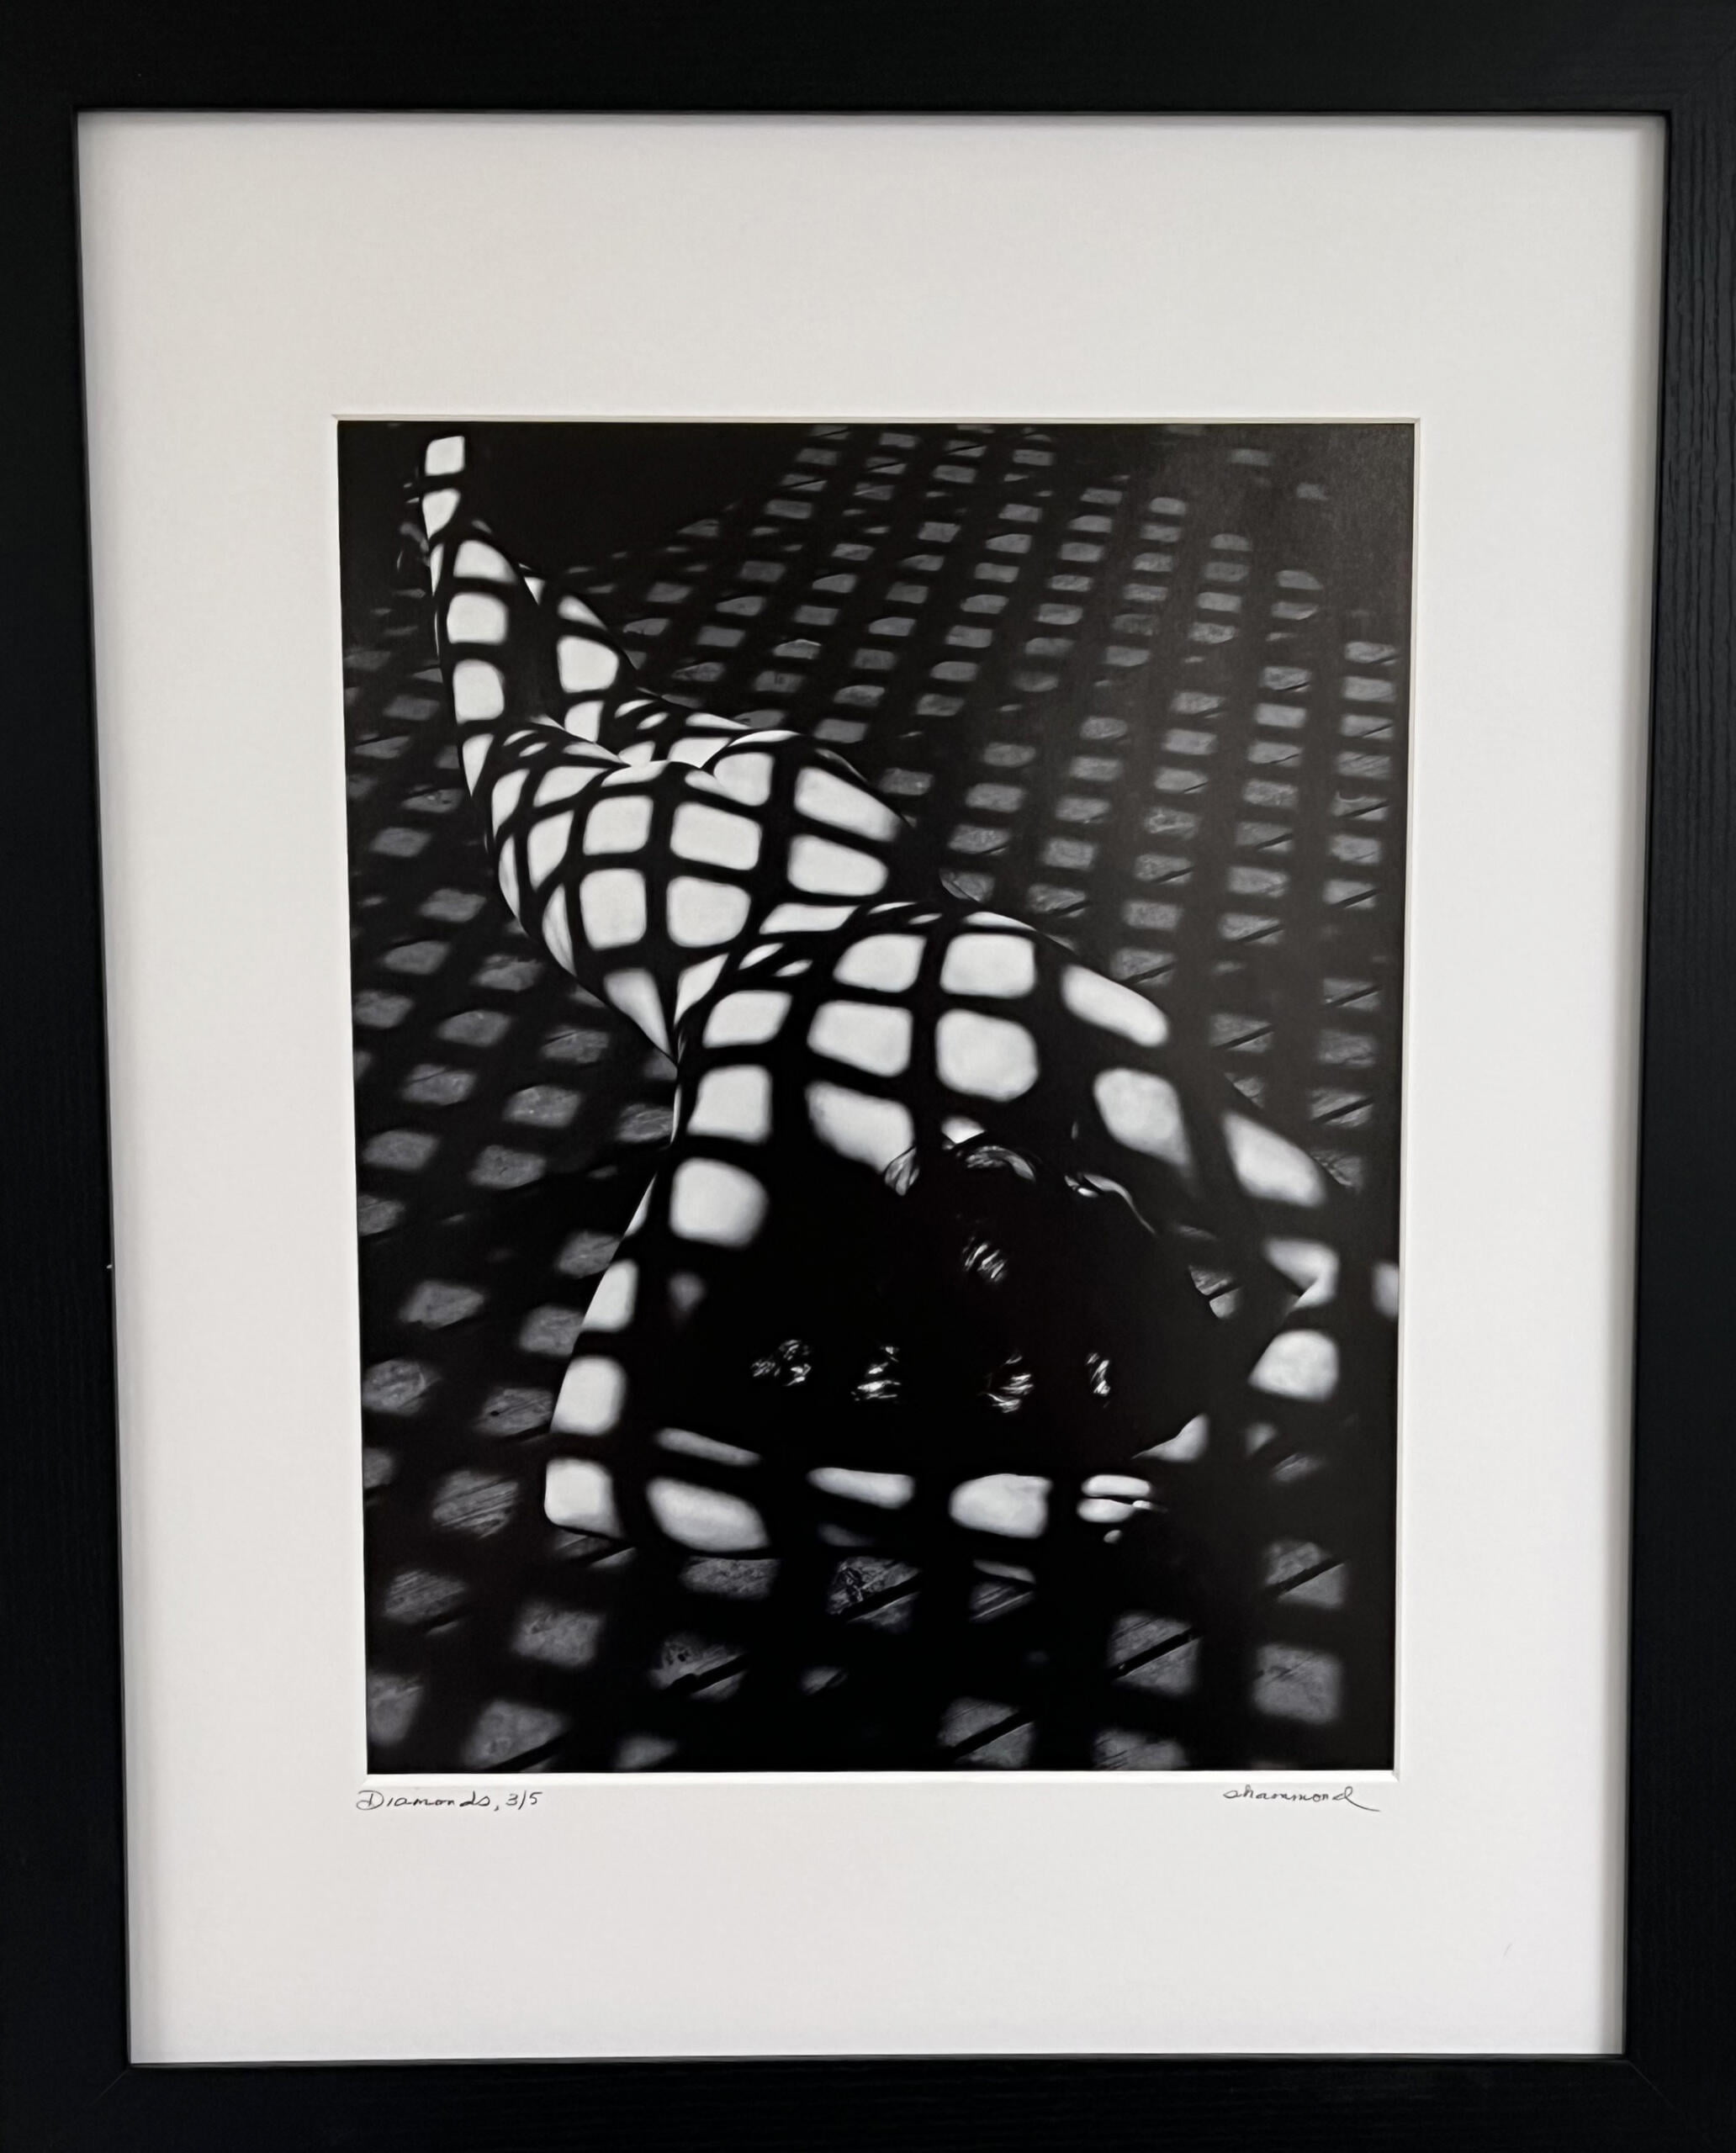 "Diamonds" by Susan Hammond in a white matte with simple black frame.